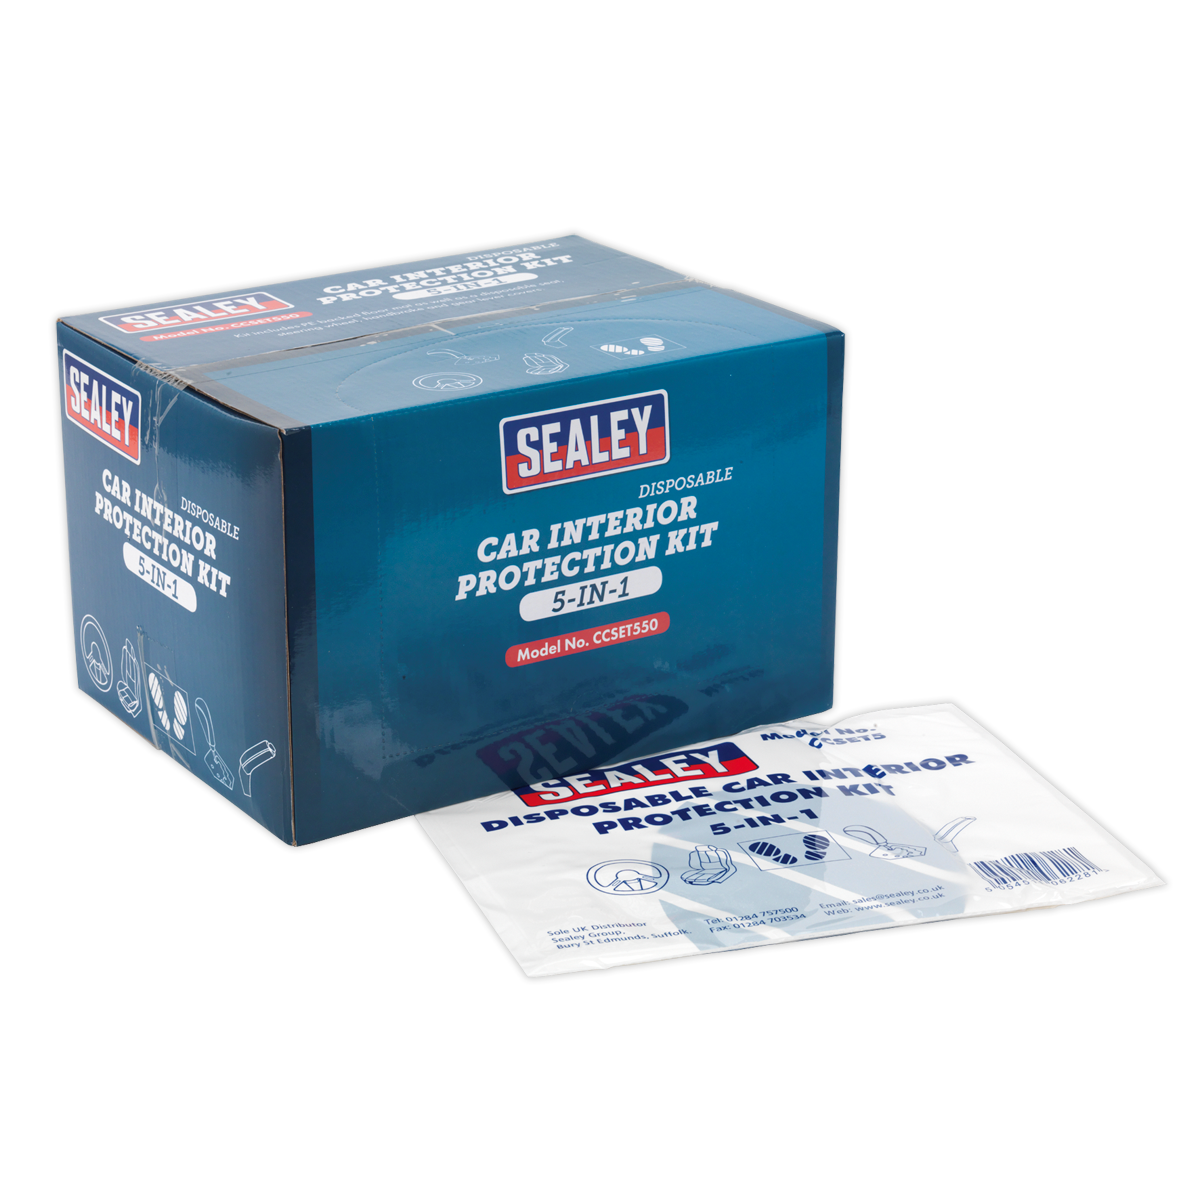 5in1 Disposable Car Interior Protection Kit -Box of 50 (Genuine Sealey ccset550)